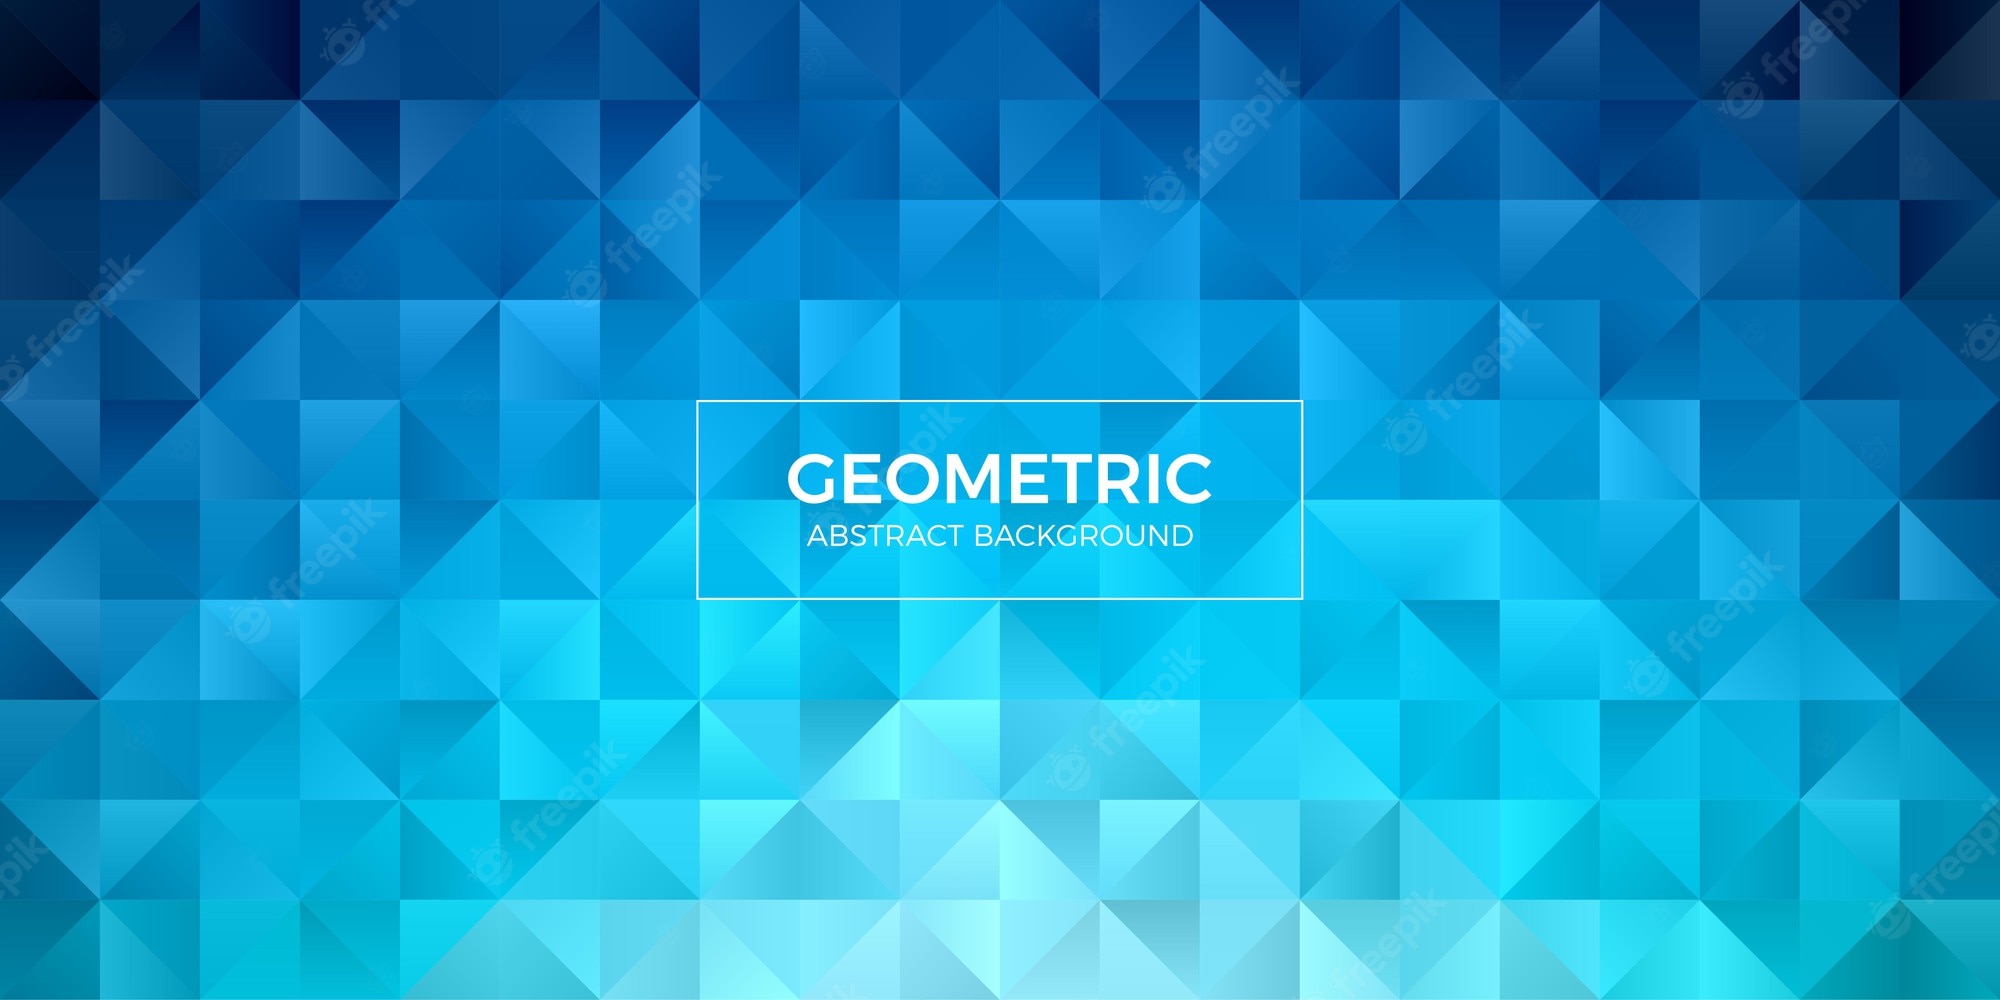 The Shape Of Triangles Blue Abstract Wallpapers